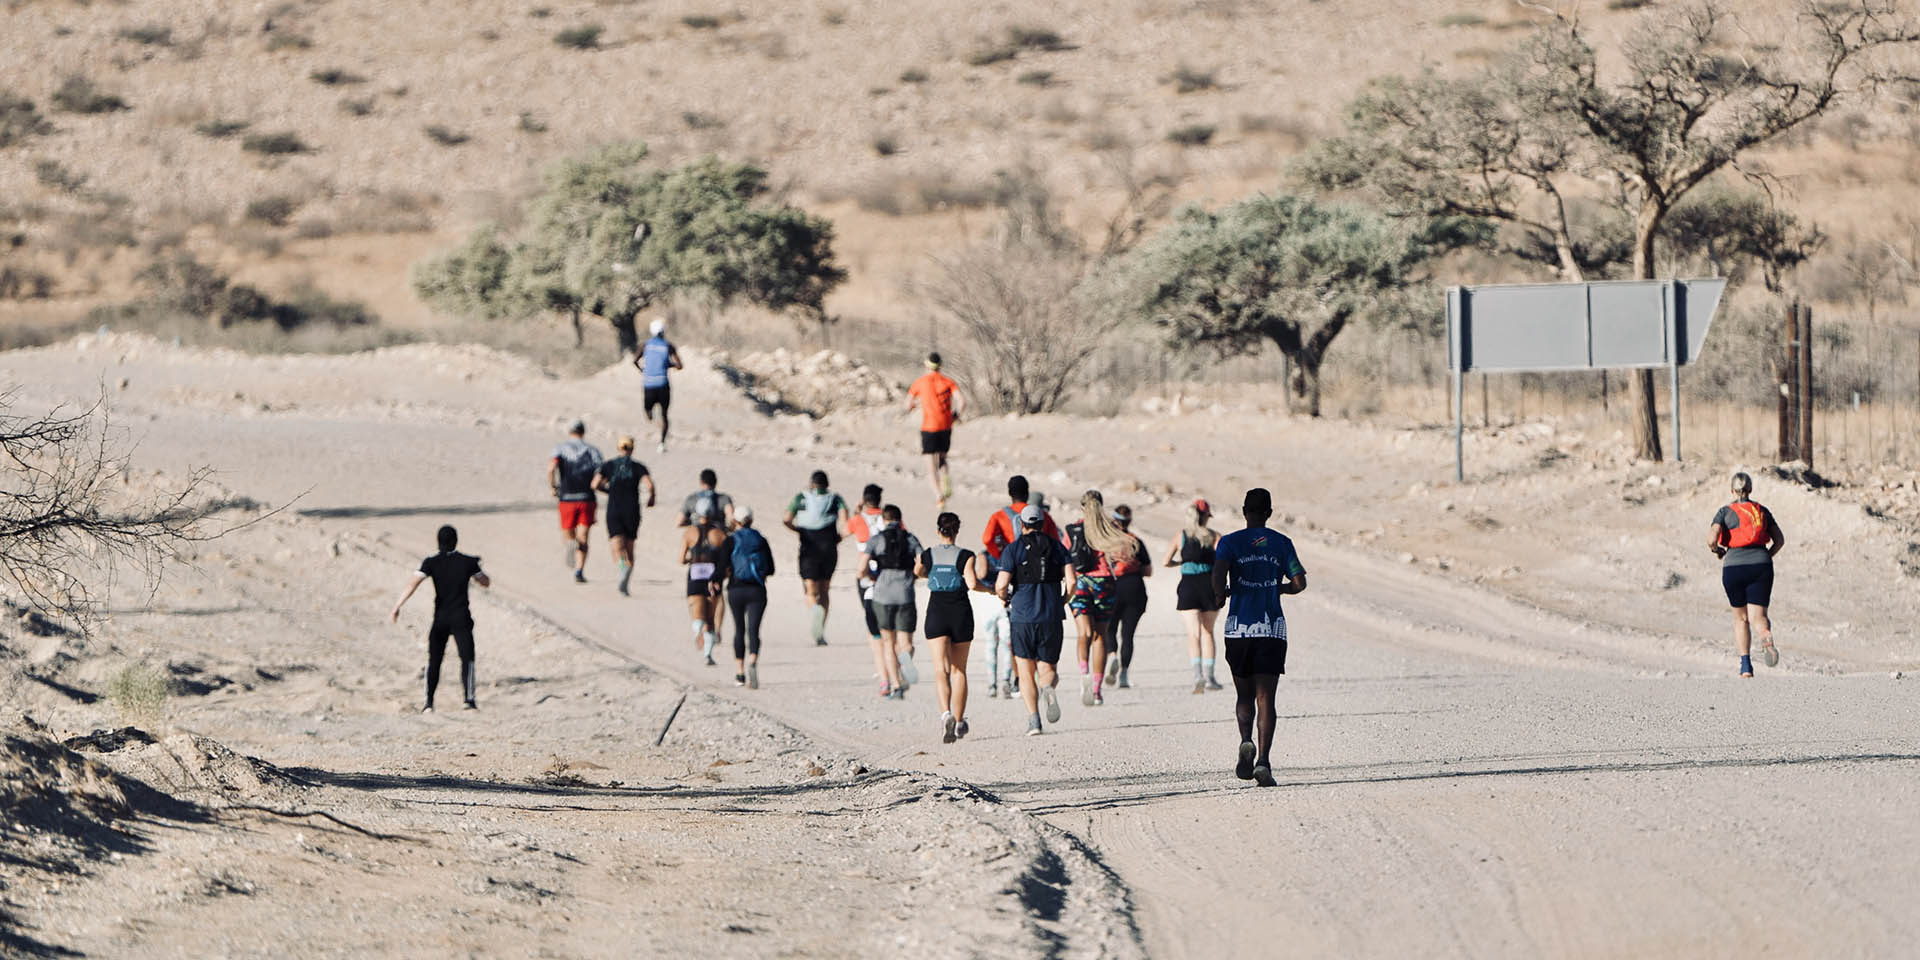 Trail runners in Namibia